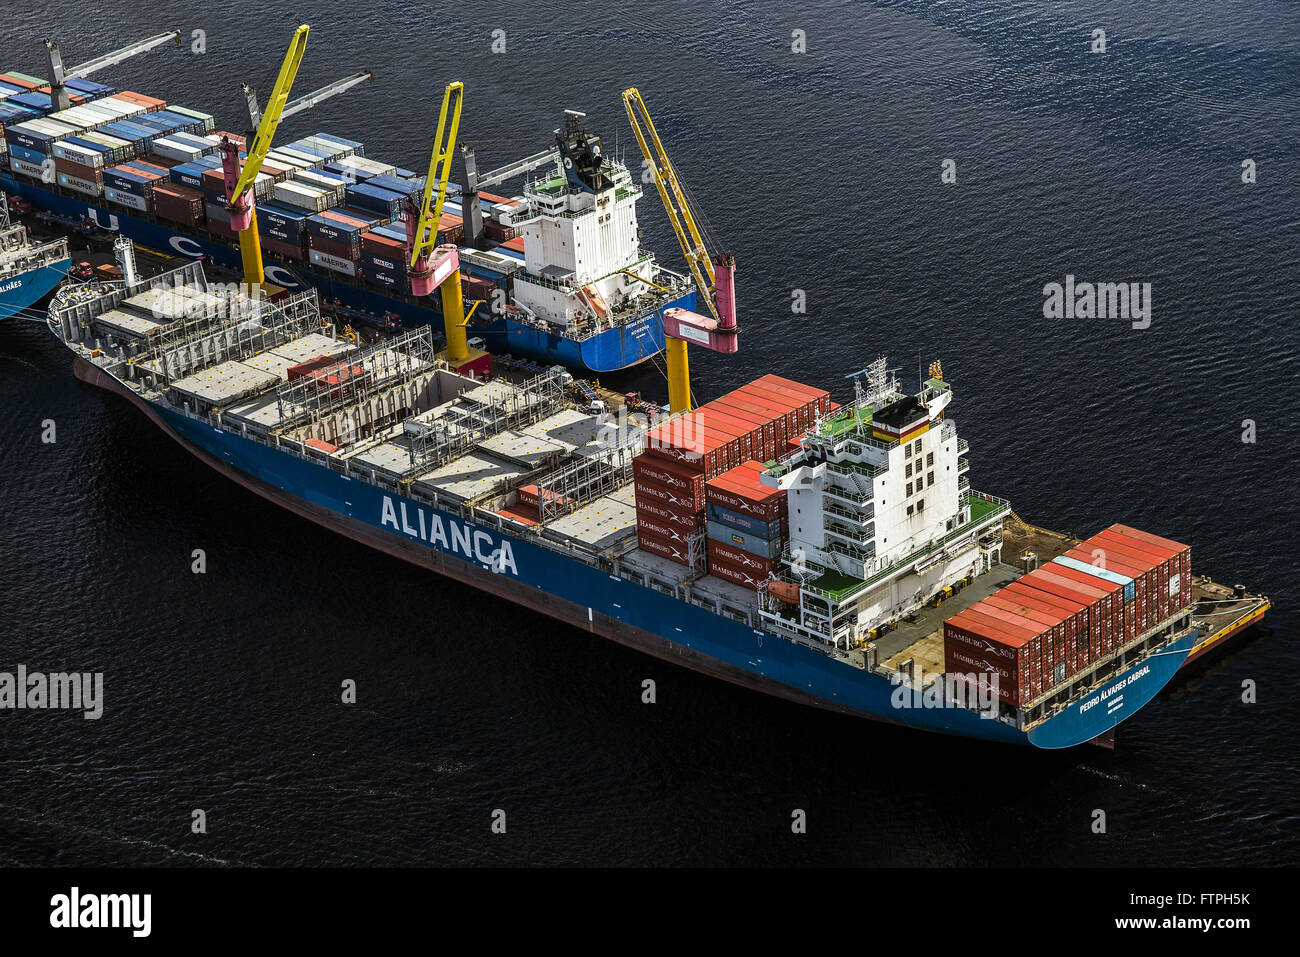 Aerial view of the Port Freighters Chibatao Stock Photo